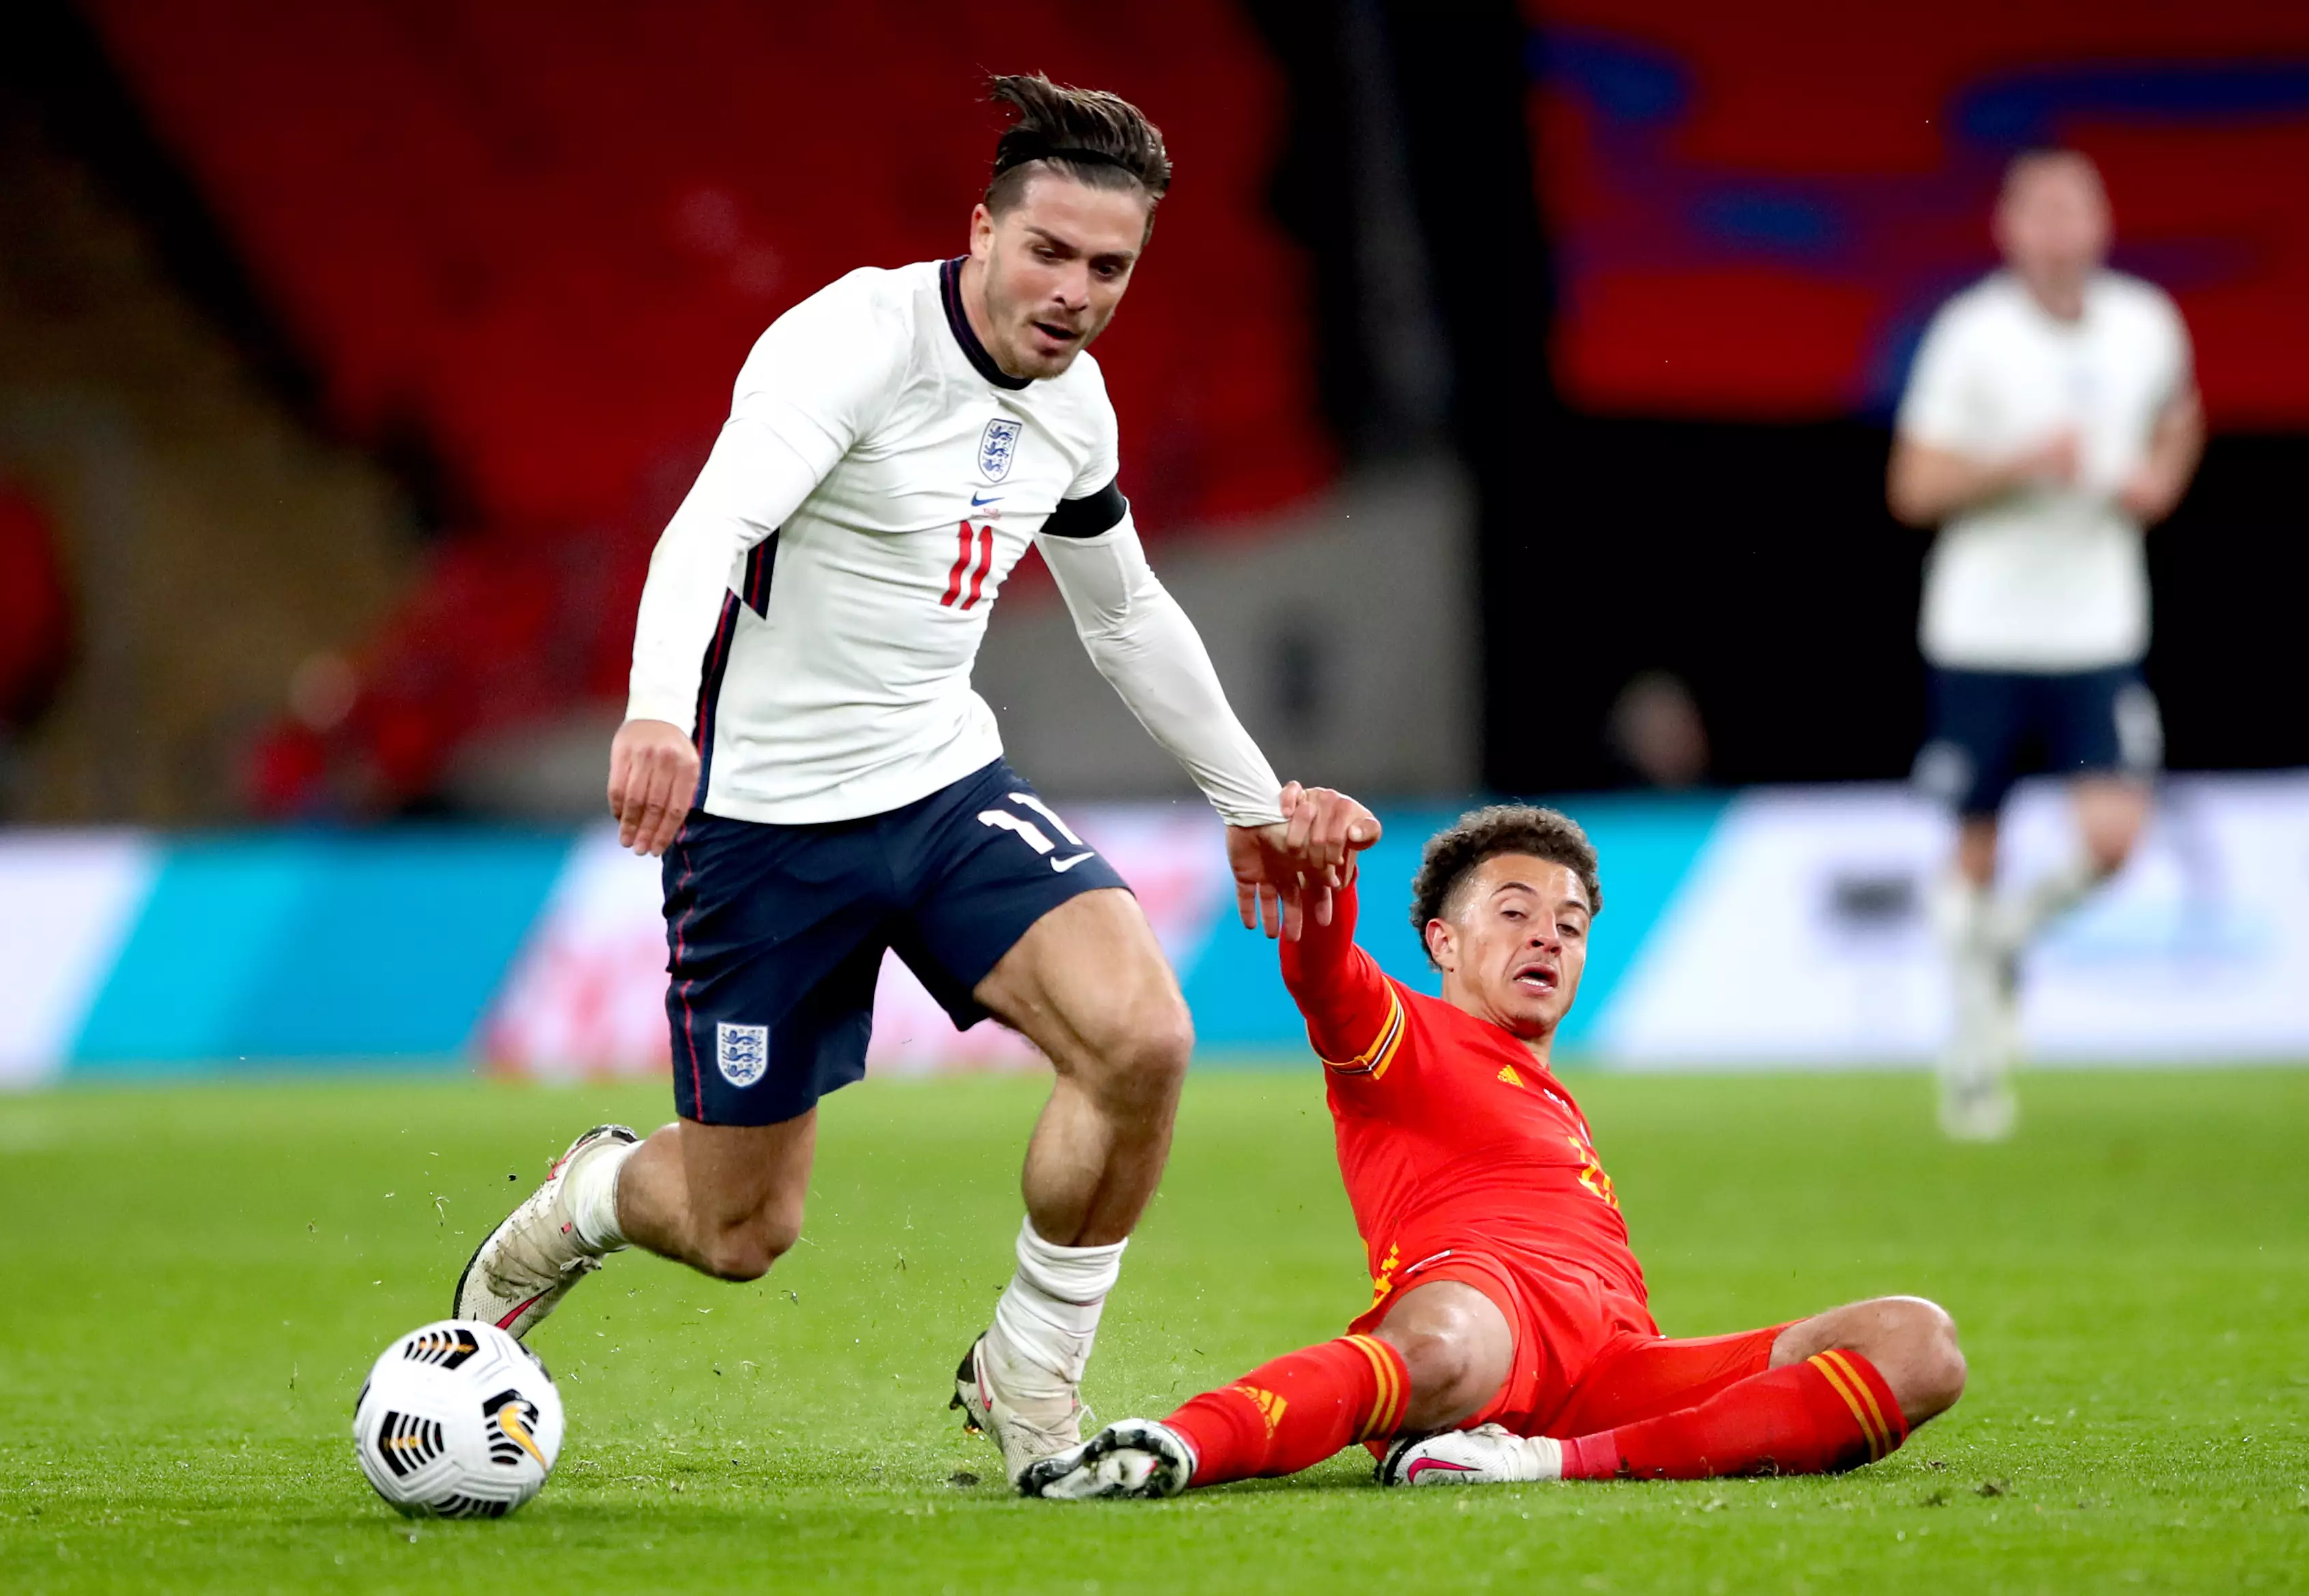 Grealish impressed on full debut against Wales. Image: PA Images